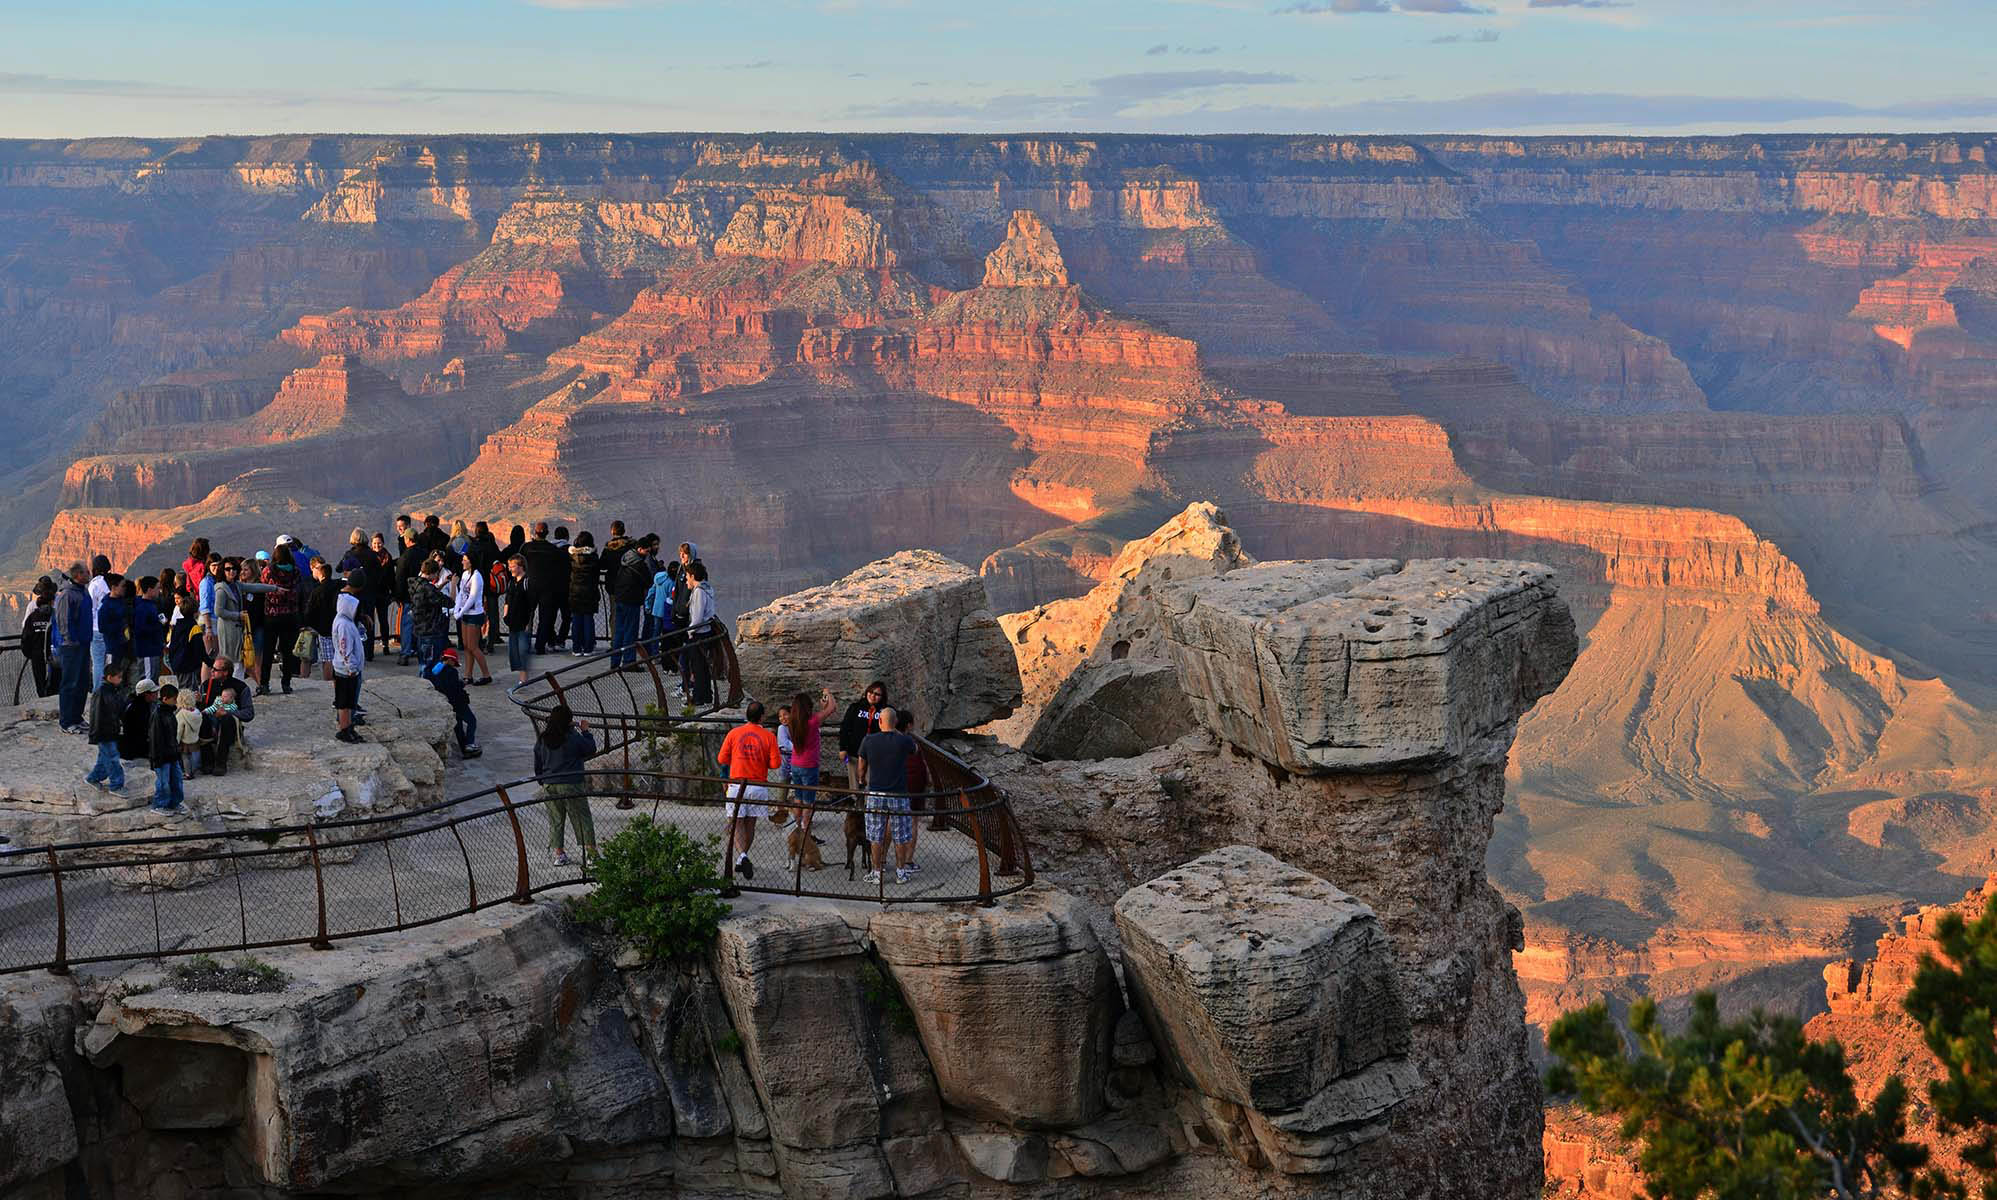 A group of visitors admiring a scenic overlook.